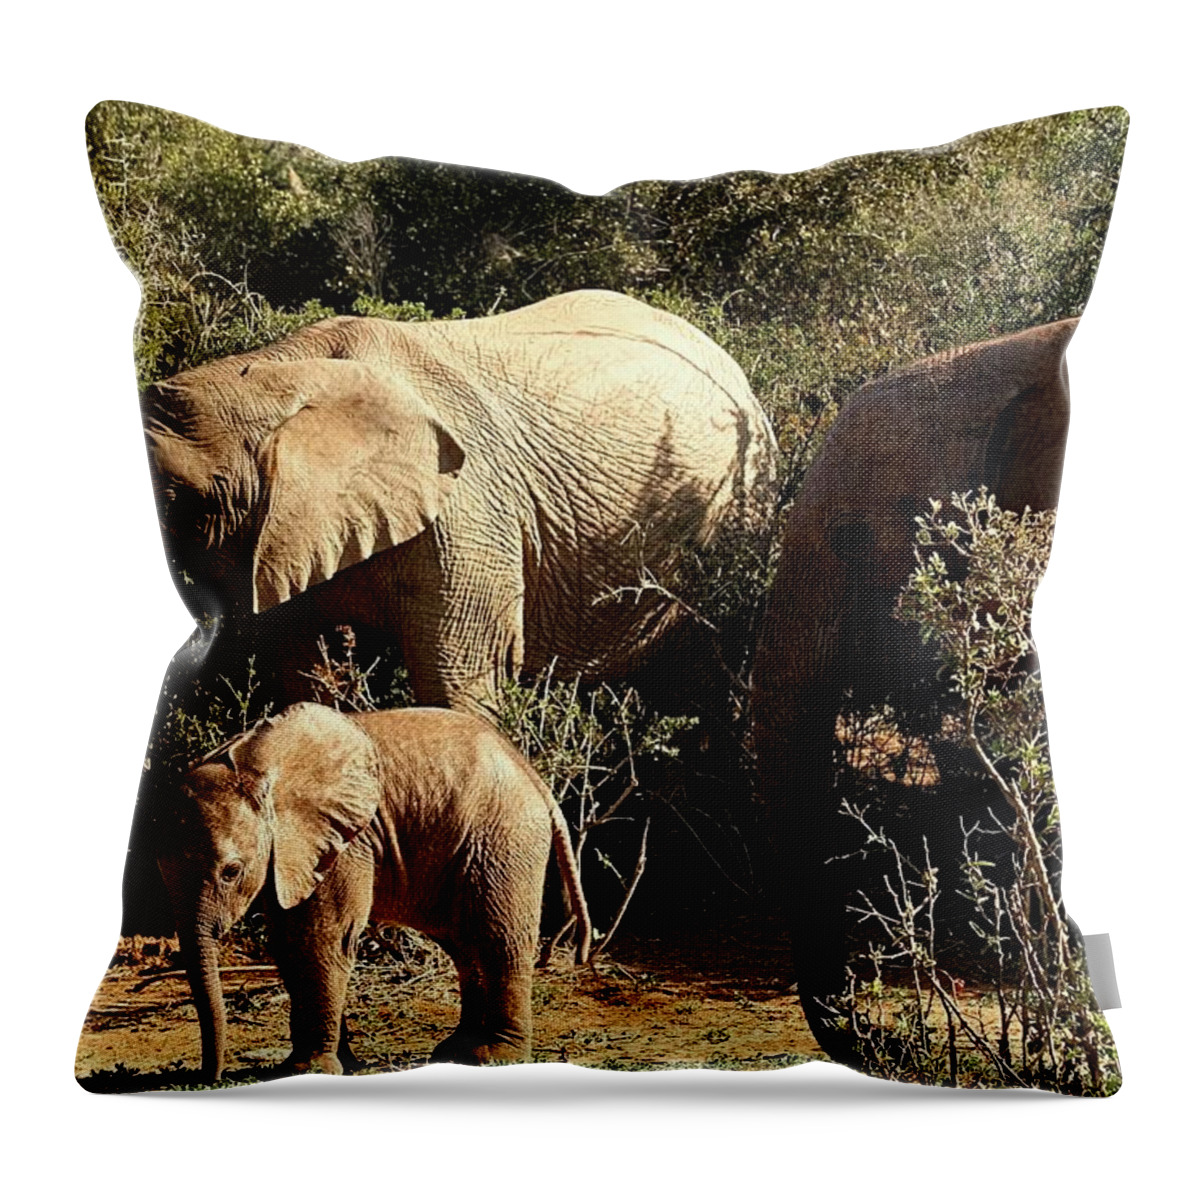 Elephants Throw Pillow featuring the photograph Elephant Family by Jennifer Wheatley Wolf